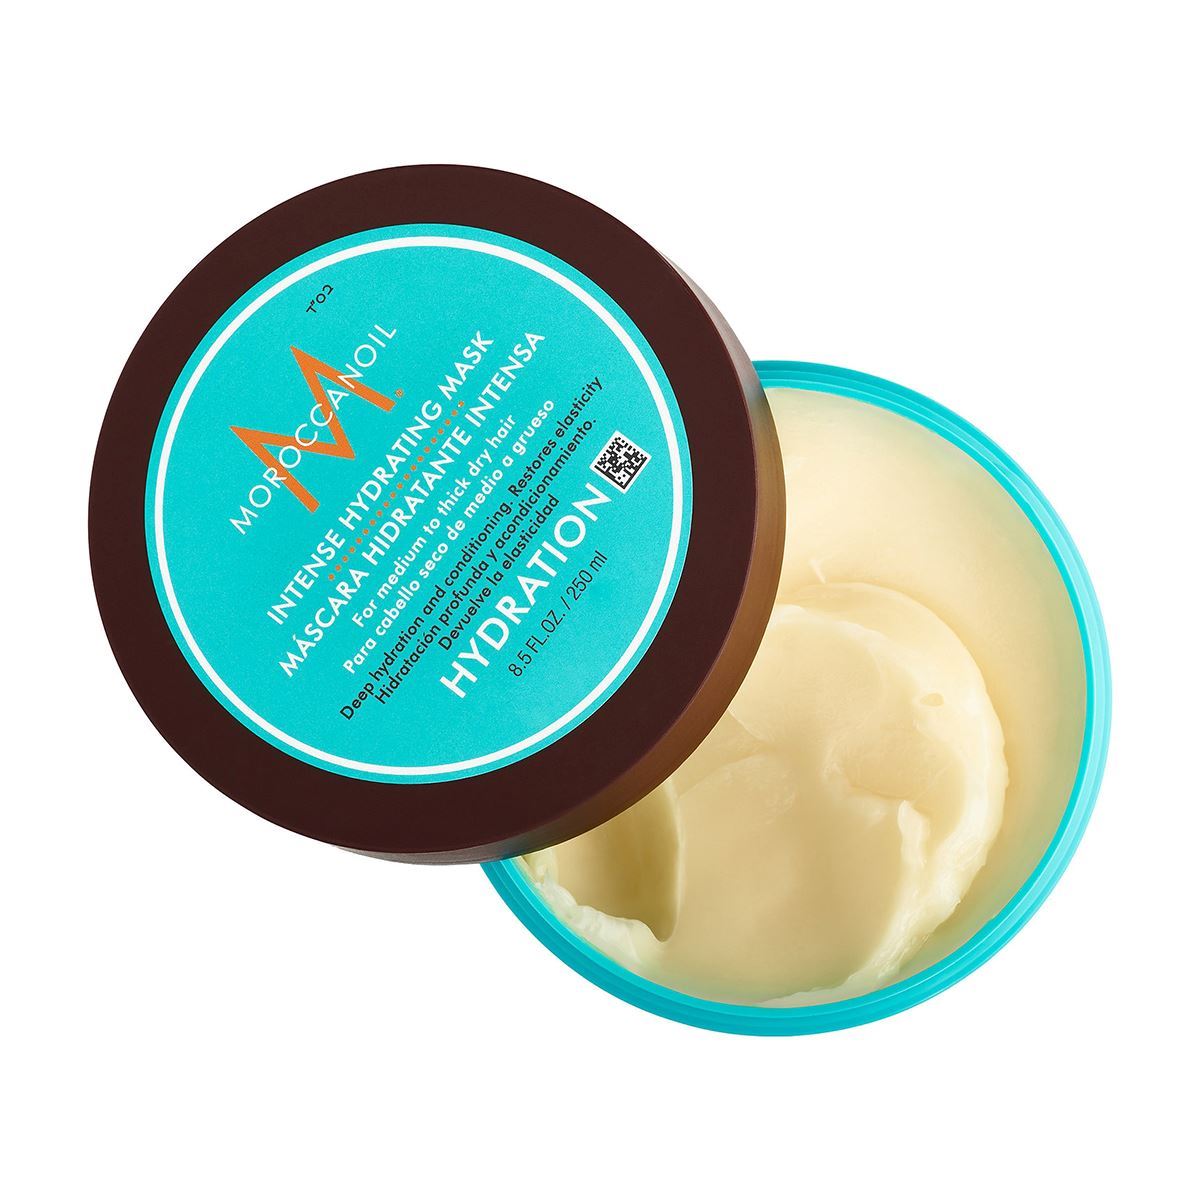 Picture of Moroccanoil Intense Hydrating Mask